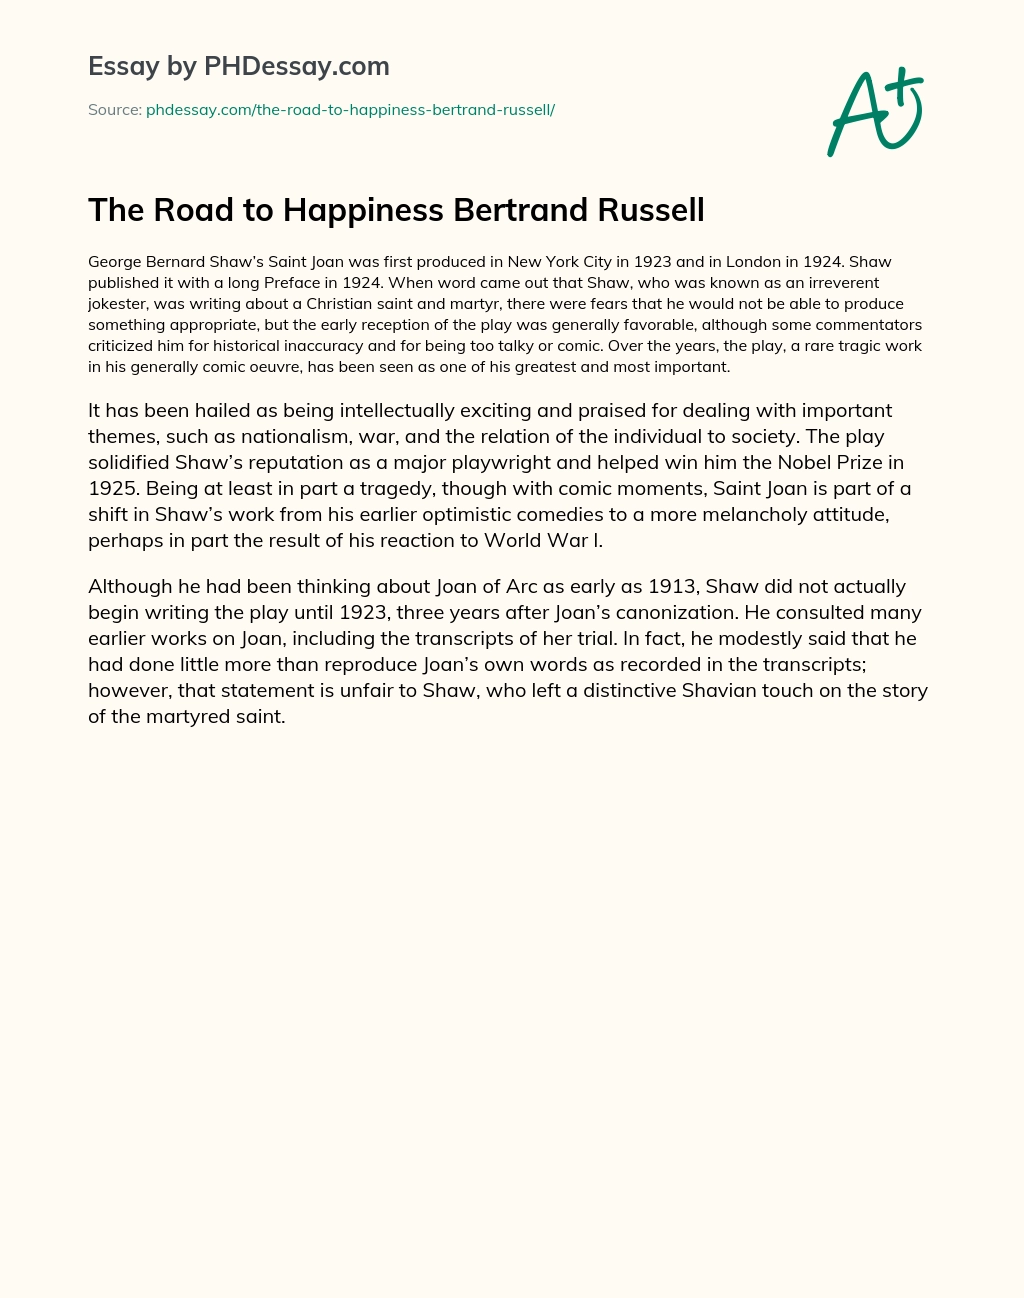 The Road to Happiness Bertrand Russell essay